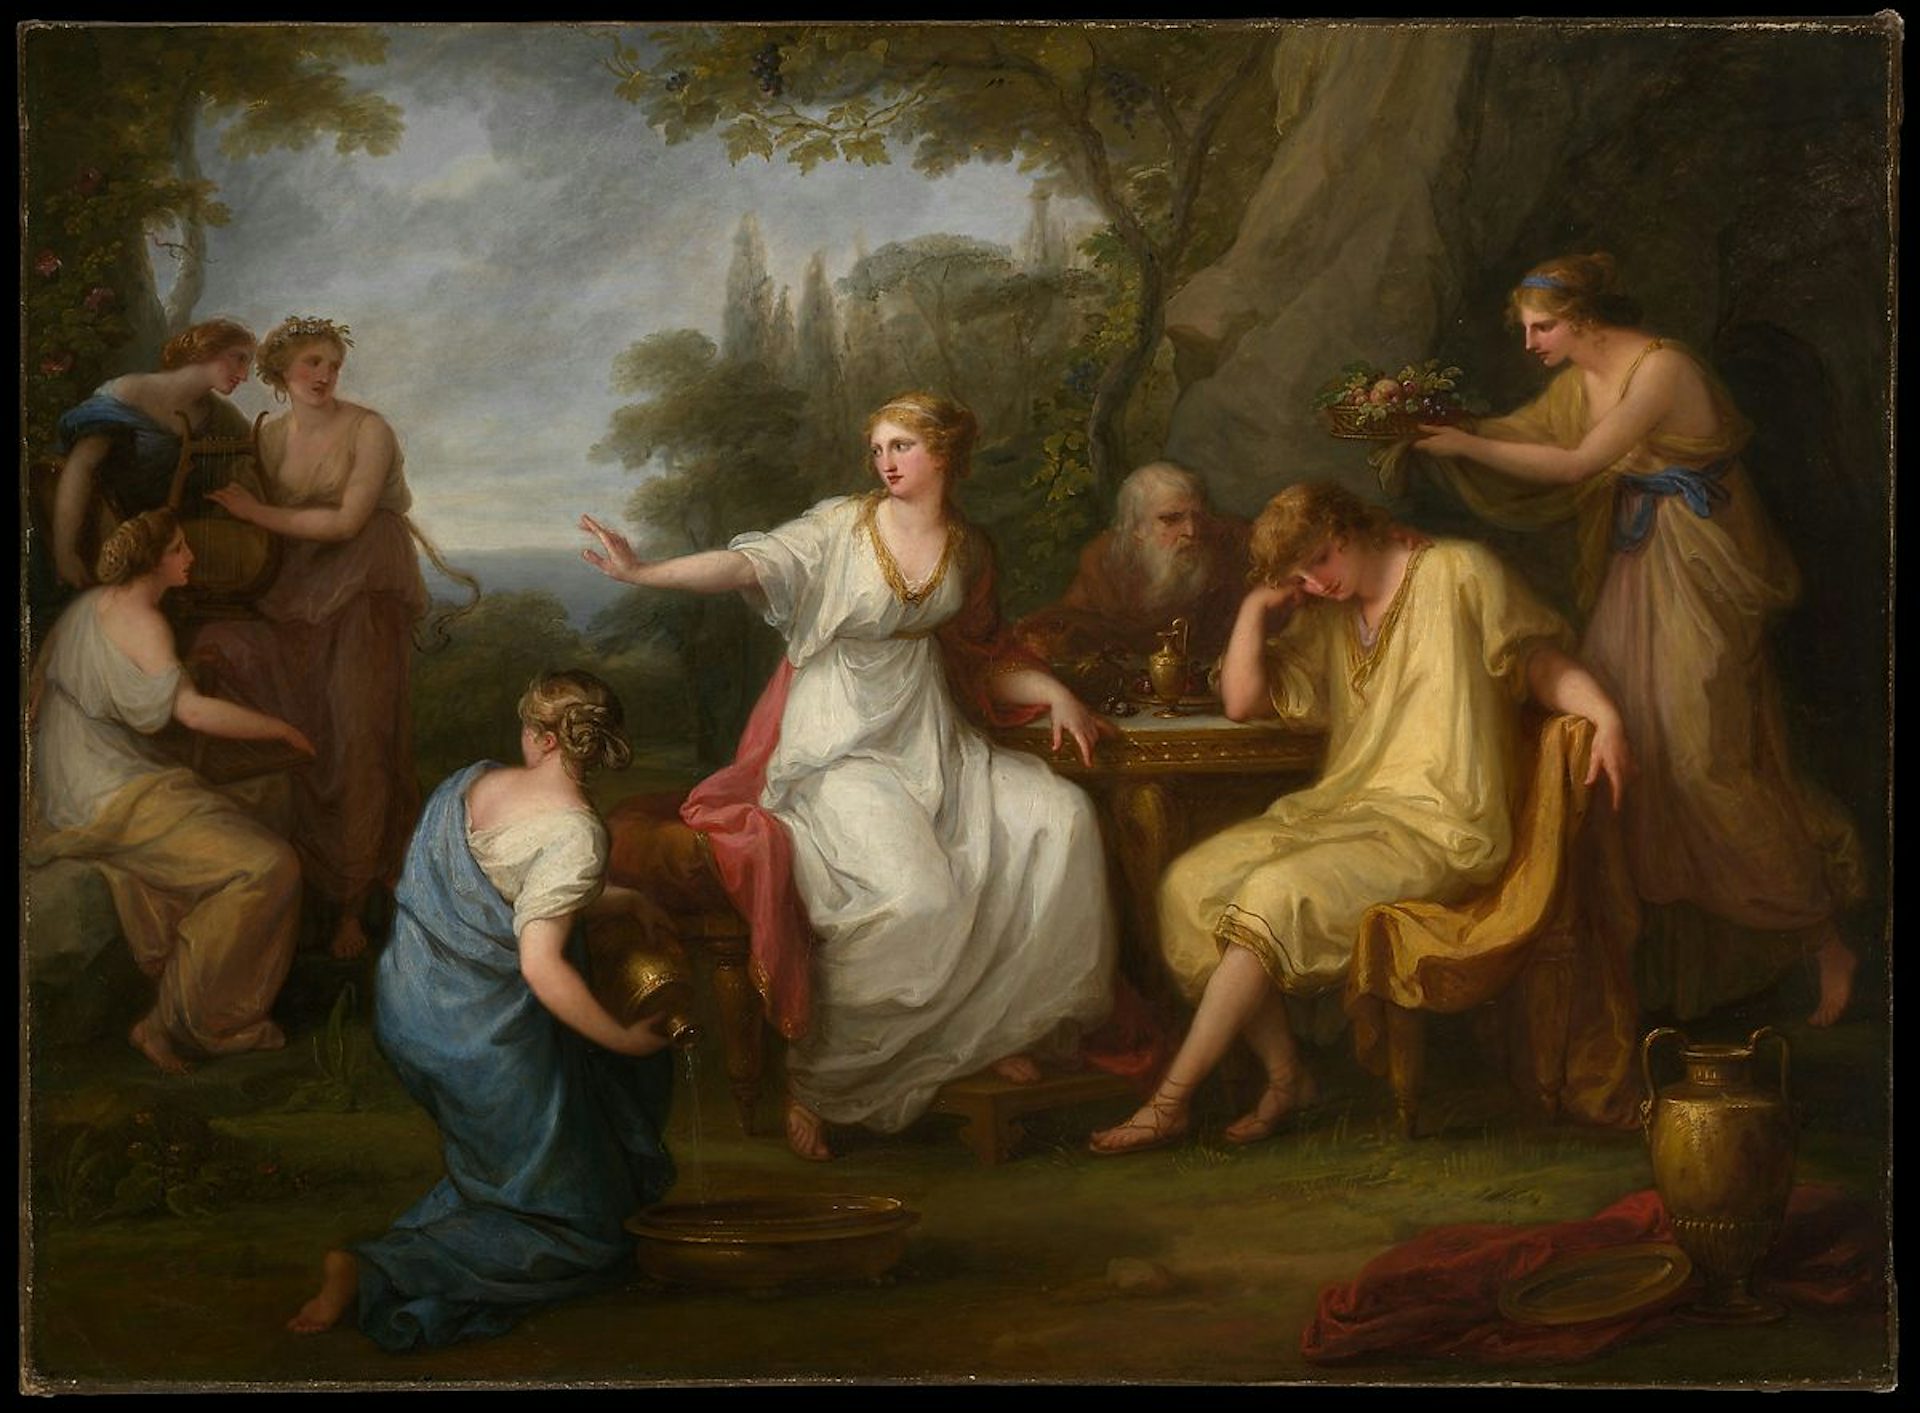 The Sorrow of Telemachus by Angelica Kauffmann